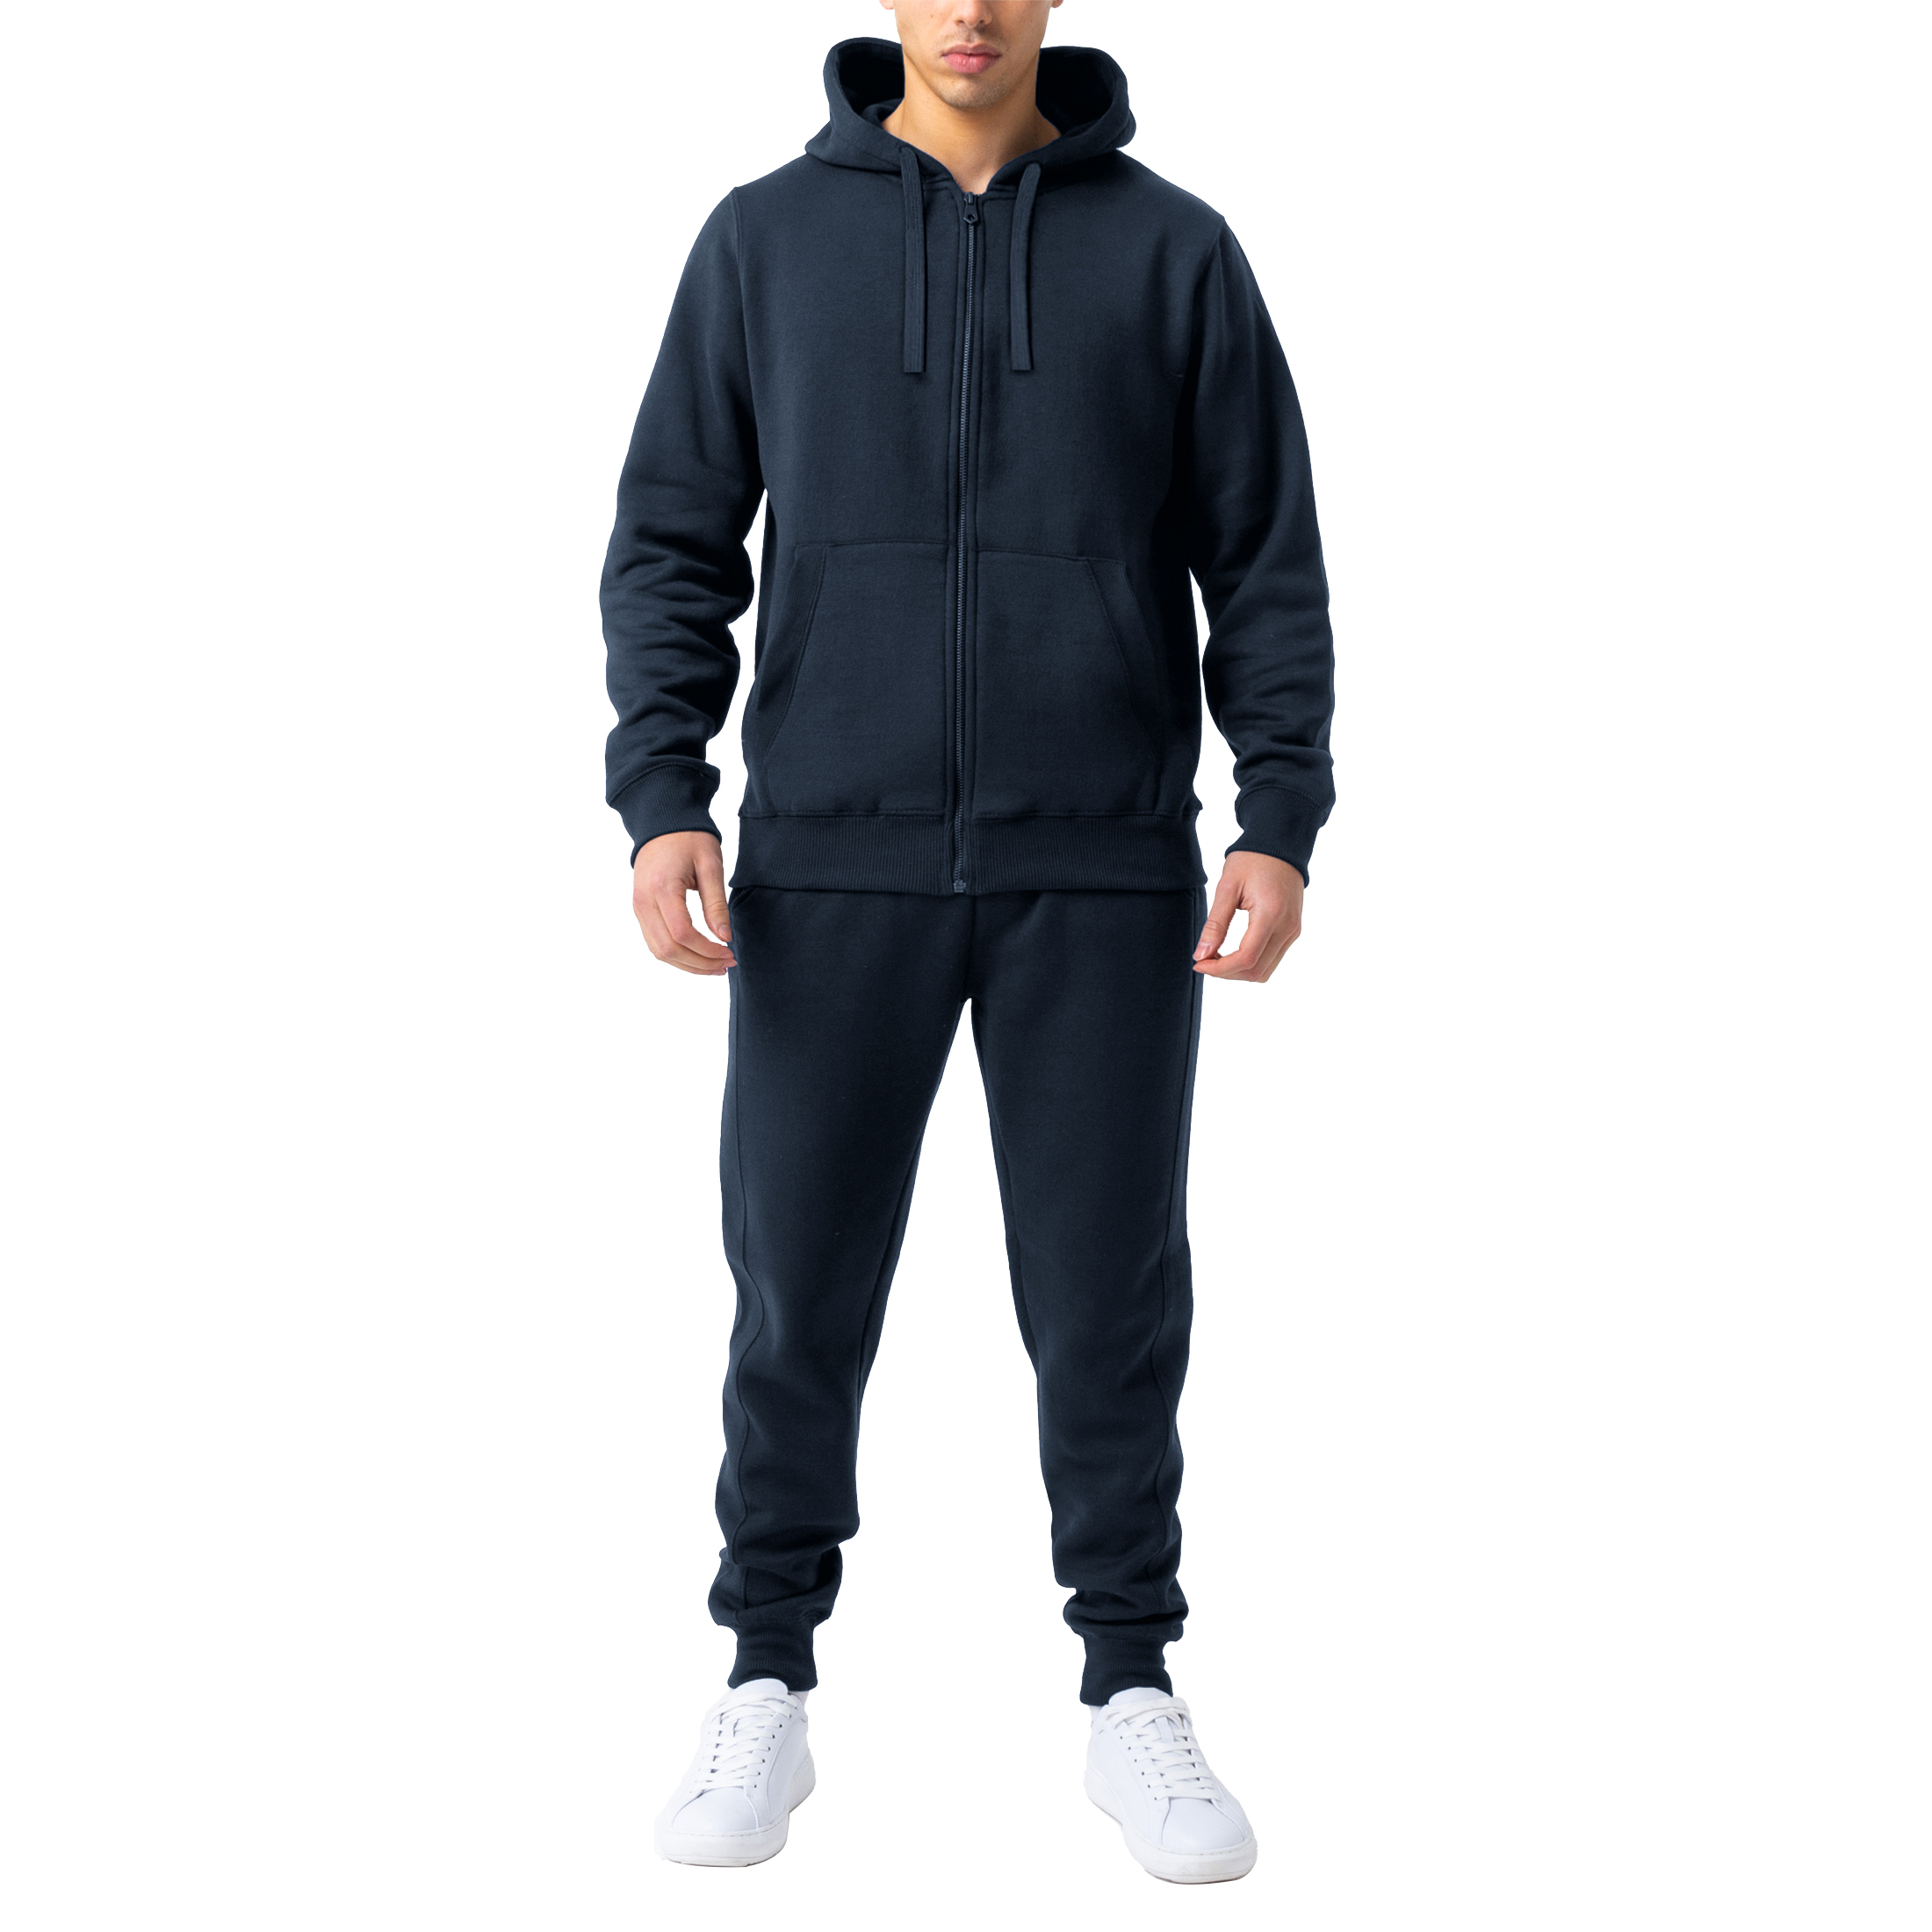 Men's Casual Jogging Athletic Active Full Zip Up Tracksuit - Navy, X-Large